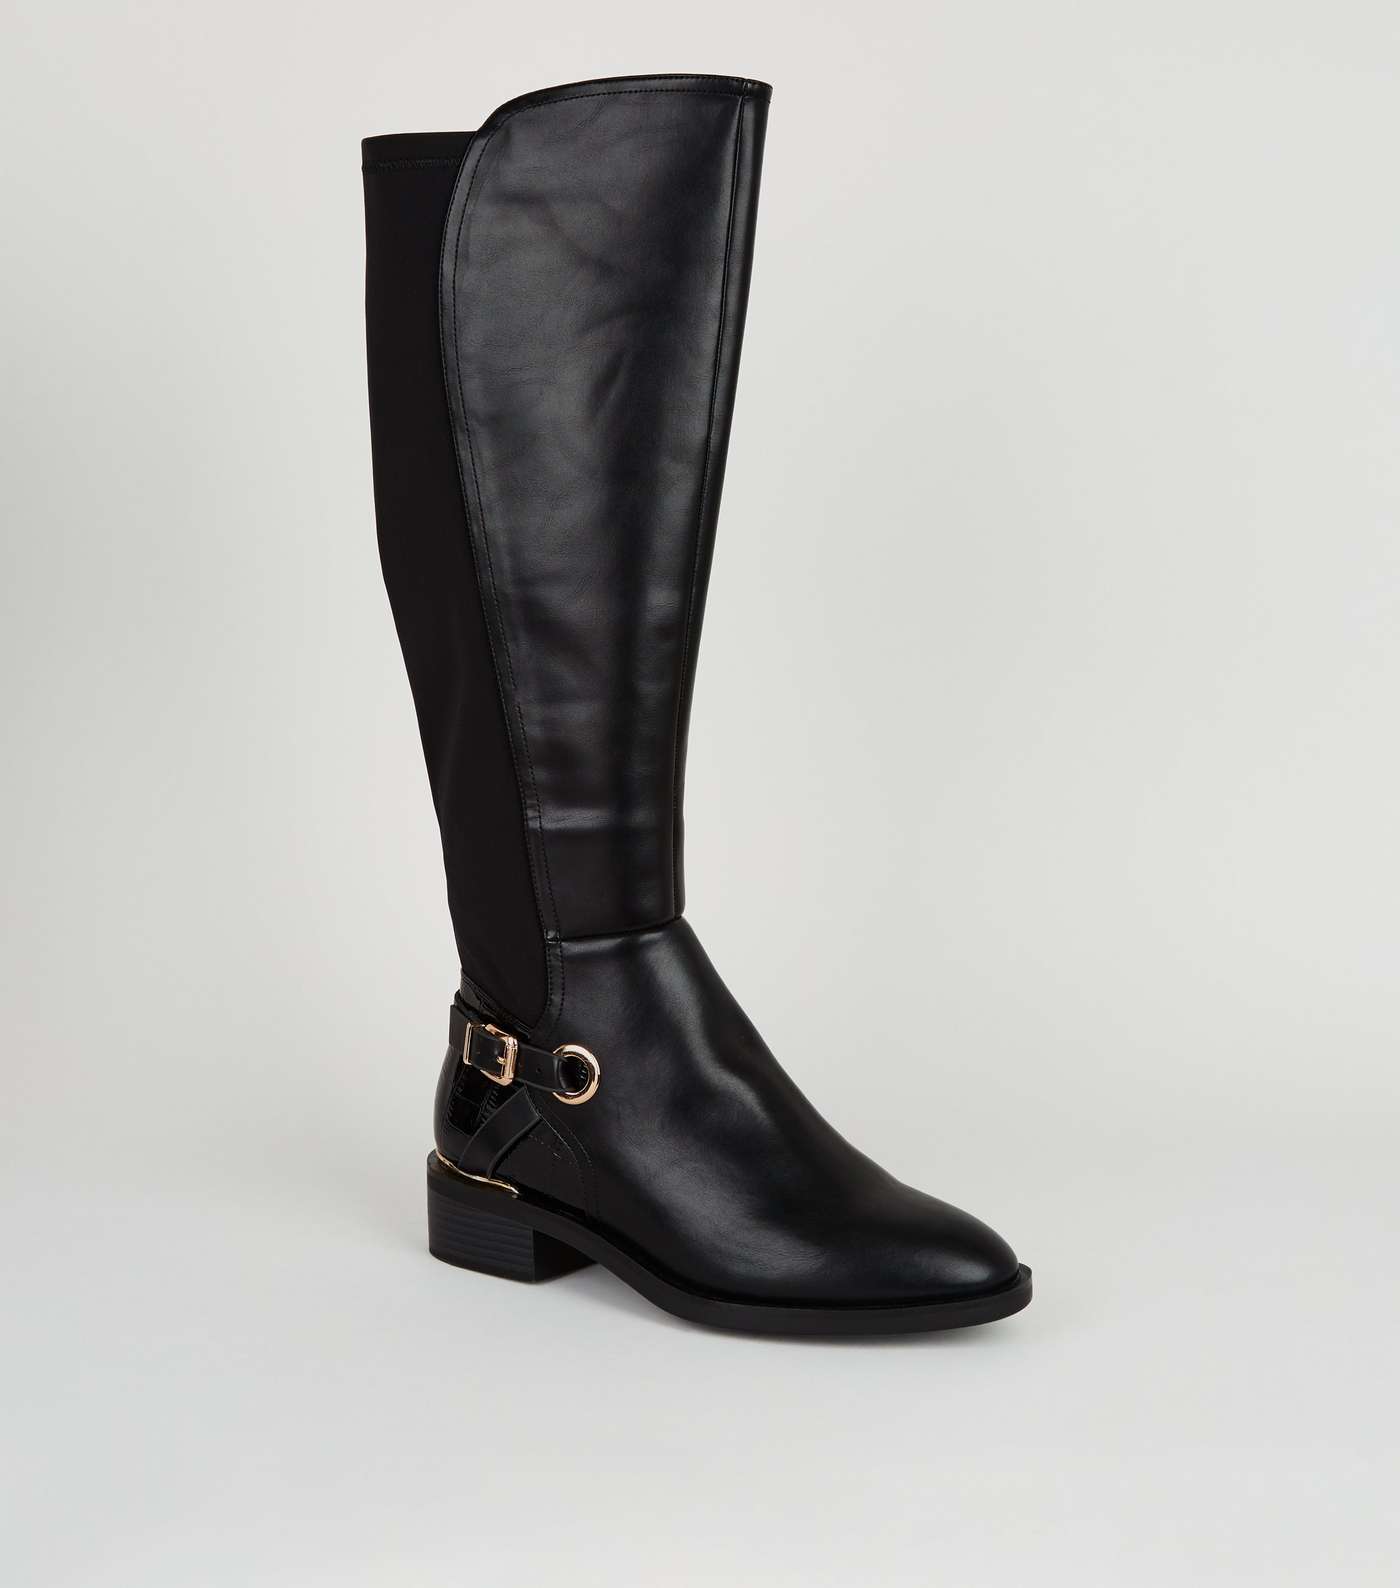 Extra Calf Fit Black Leather-Look Knee High Boots